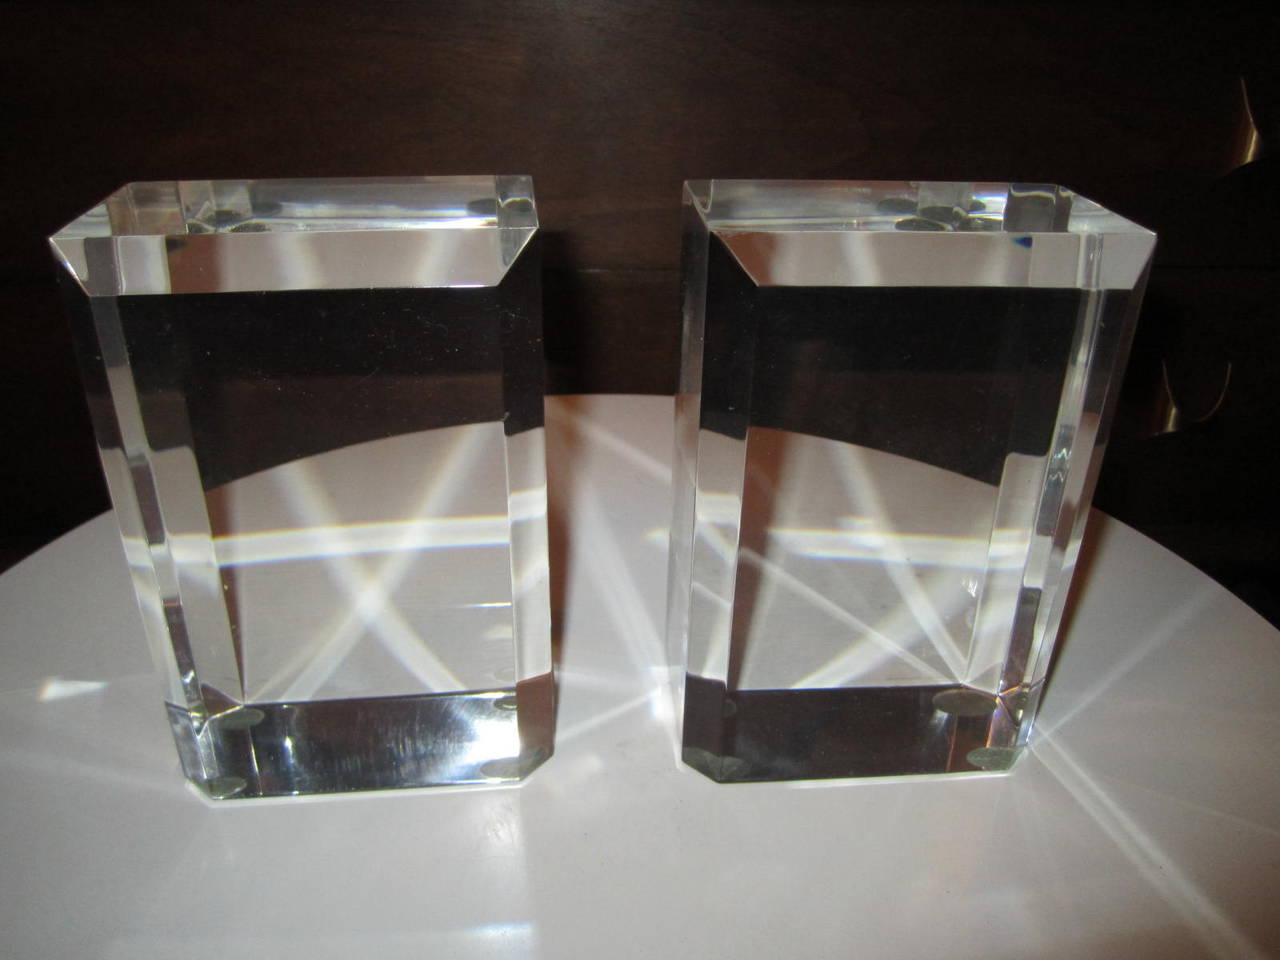 Excellent pair of Karl Springer style solid lucite block bookends.  Great faceted edges giving them a gem like quality-dazzling.